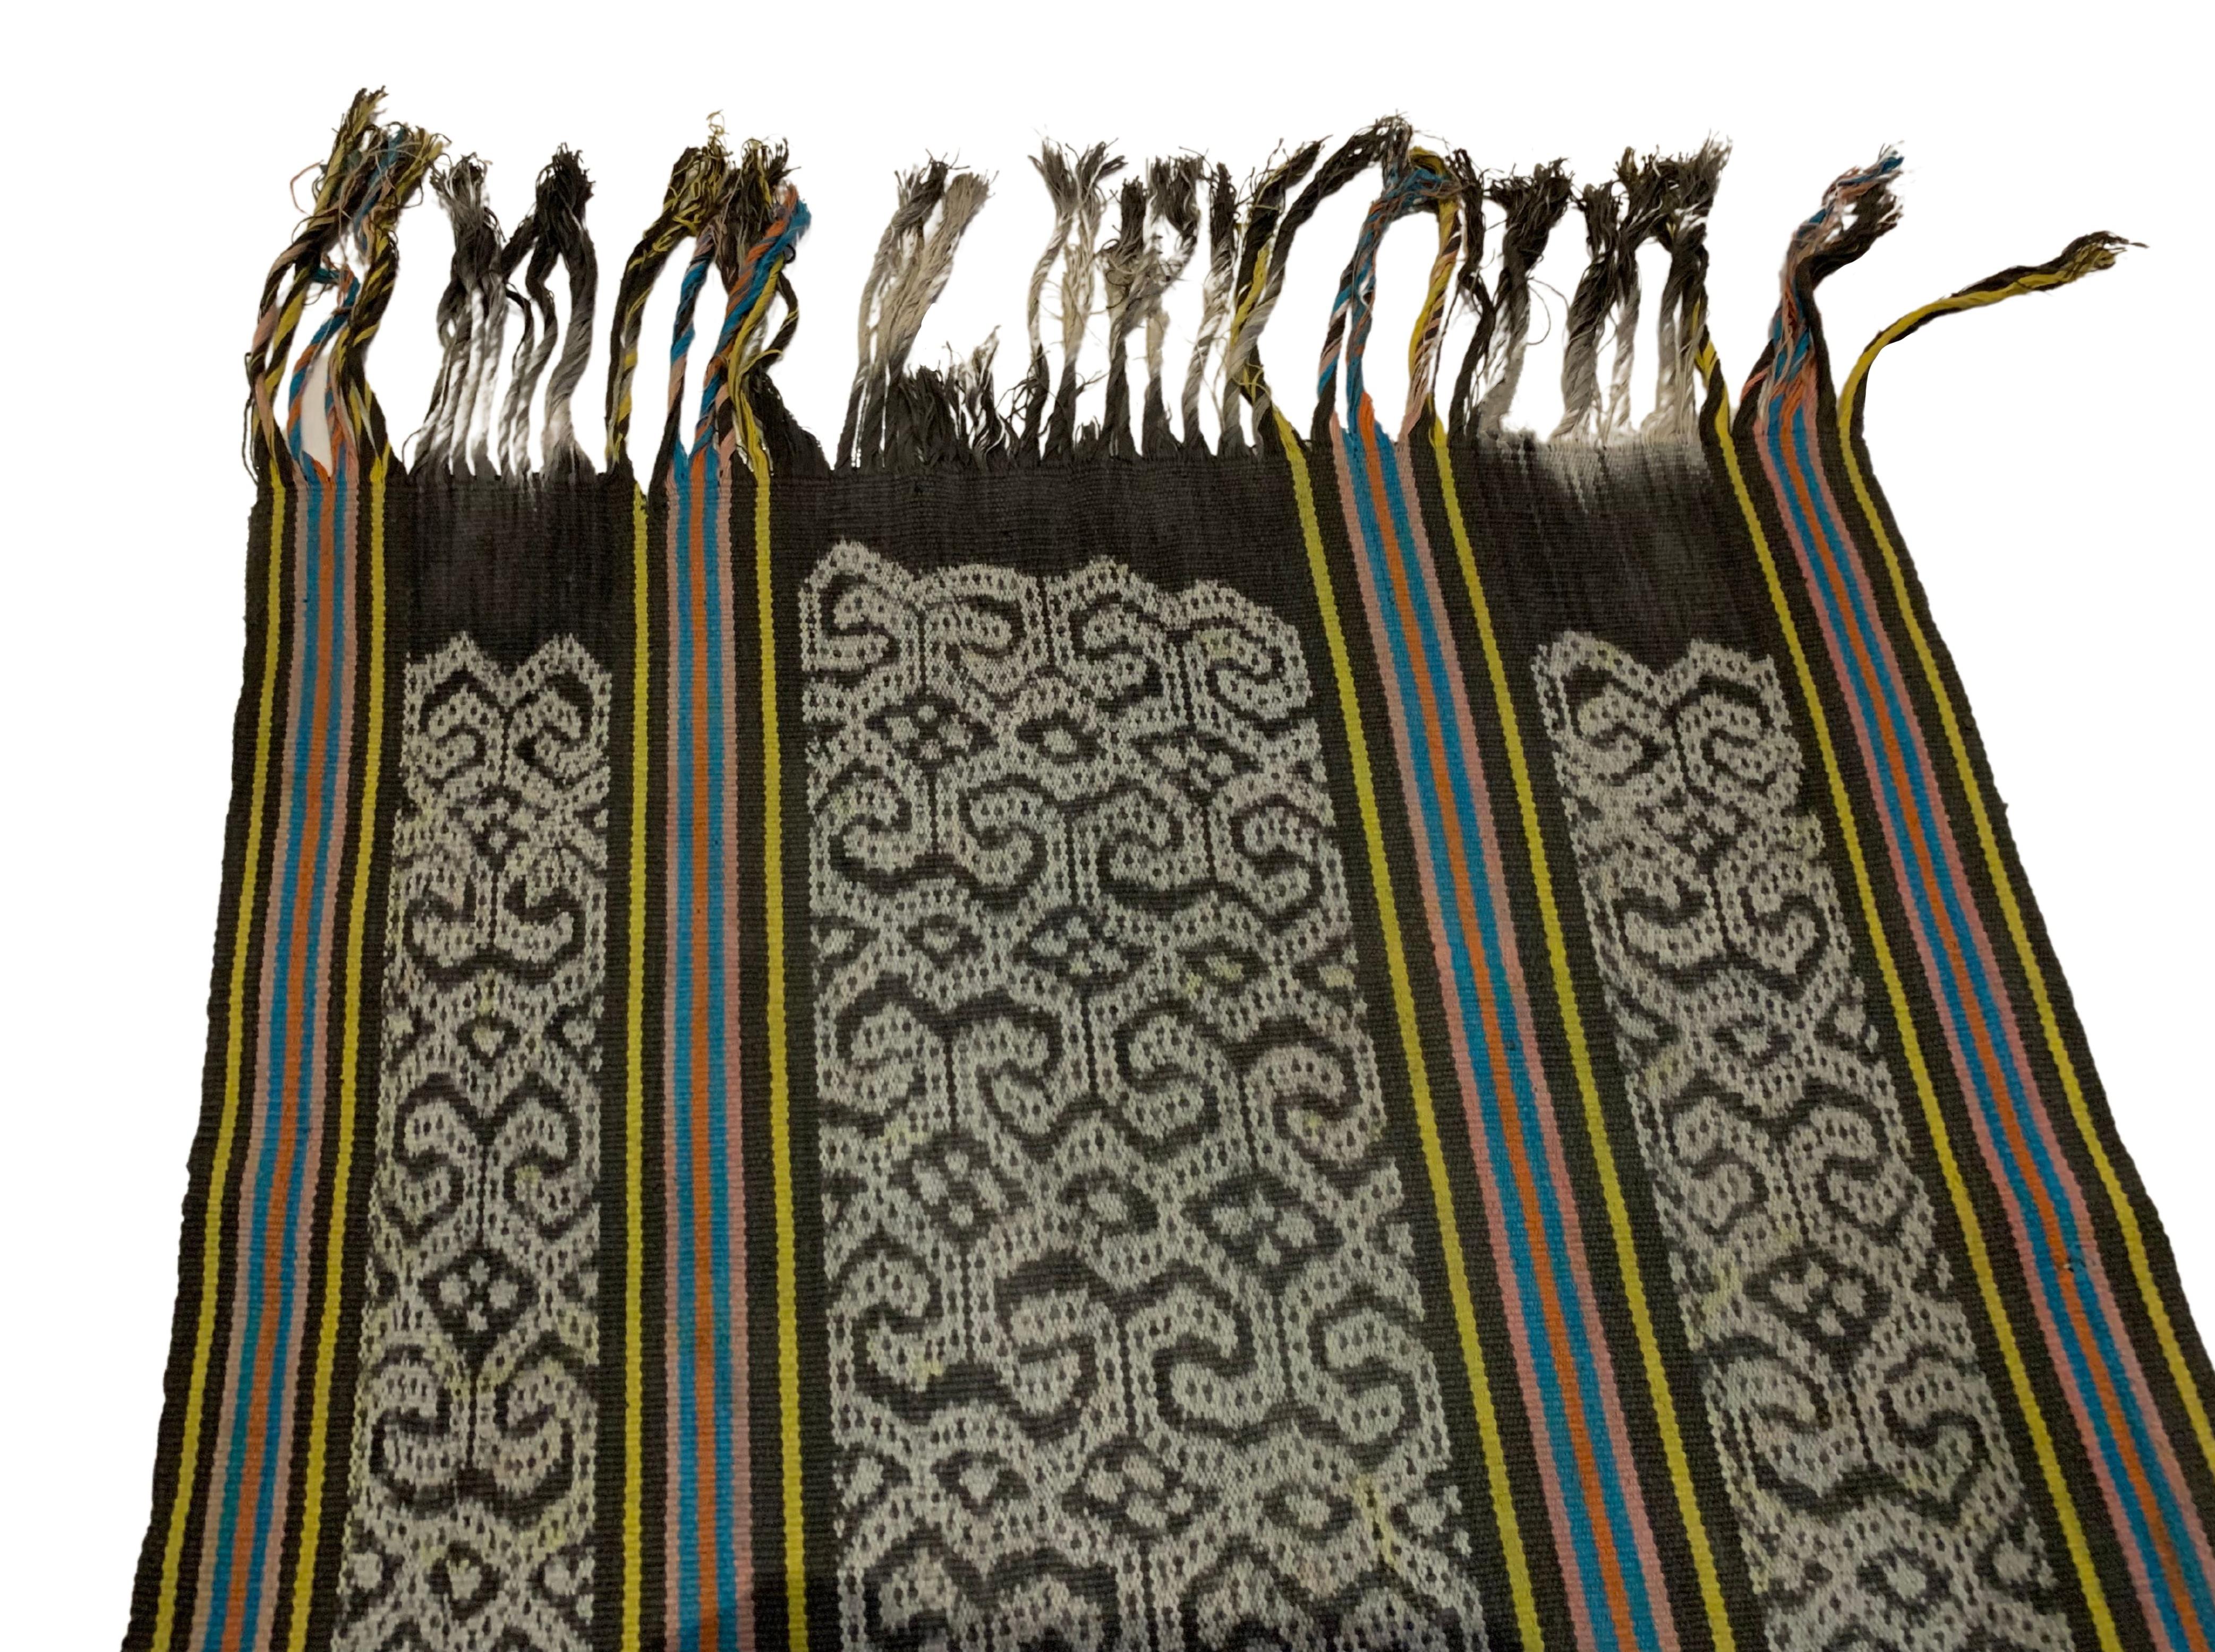 Other Long ikat Textile from Sumba Island Tribal Motifs, Indonesia